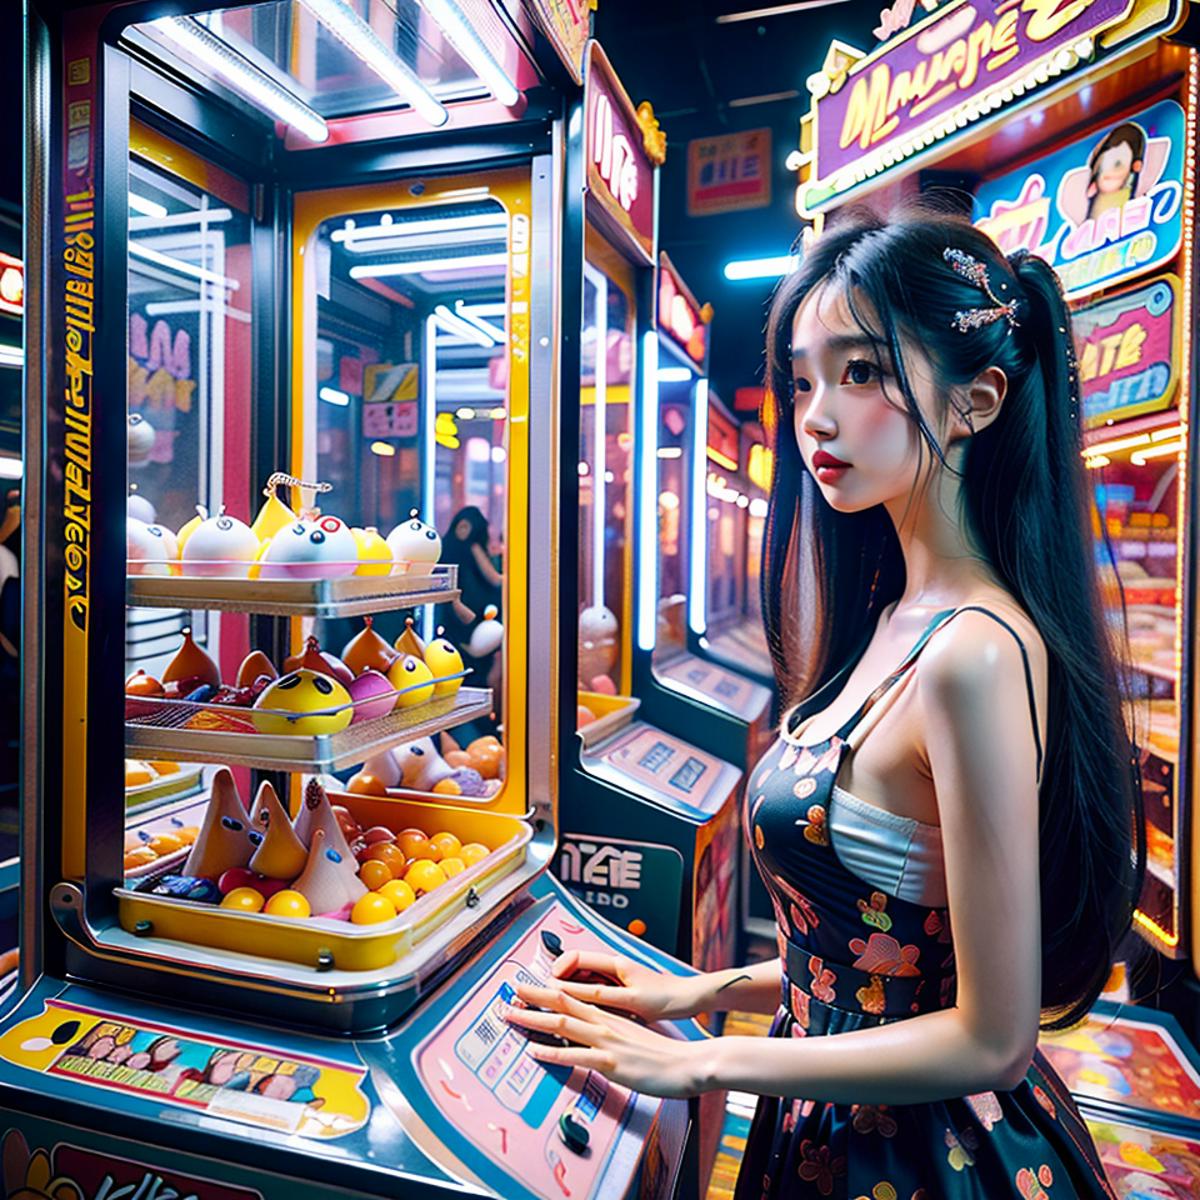 crane game image by ghostpaint